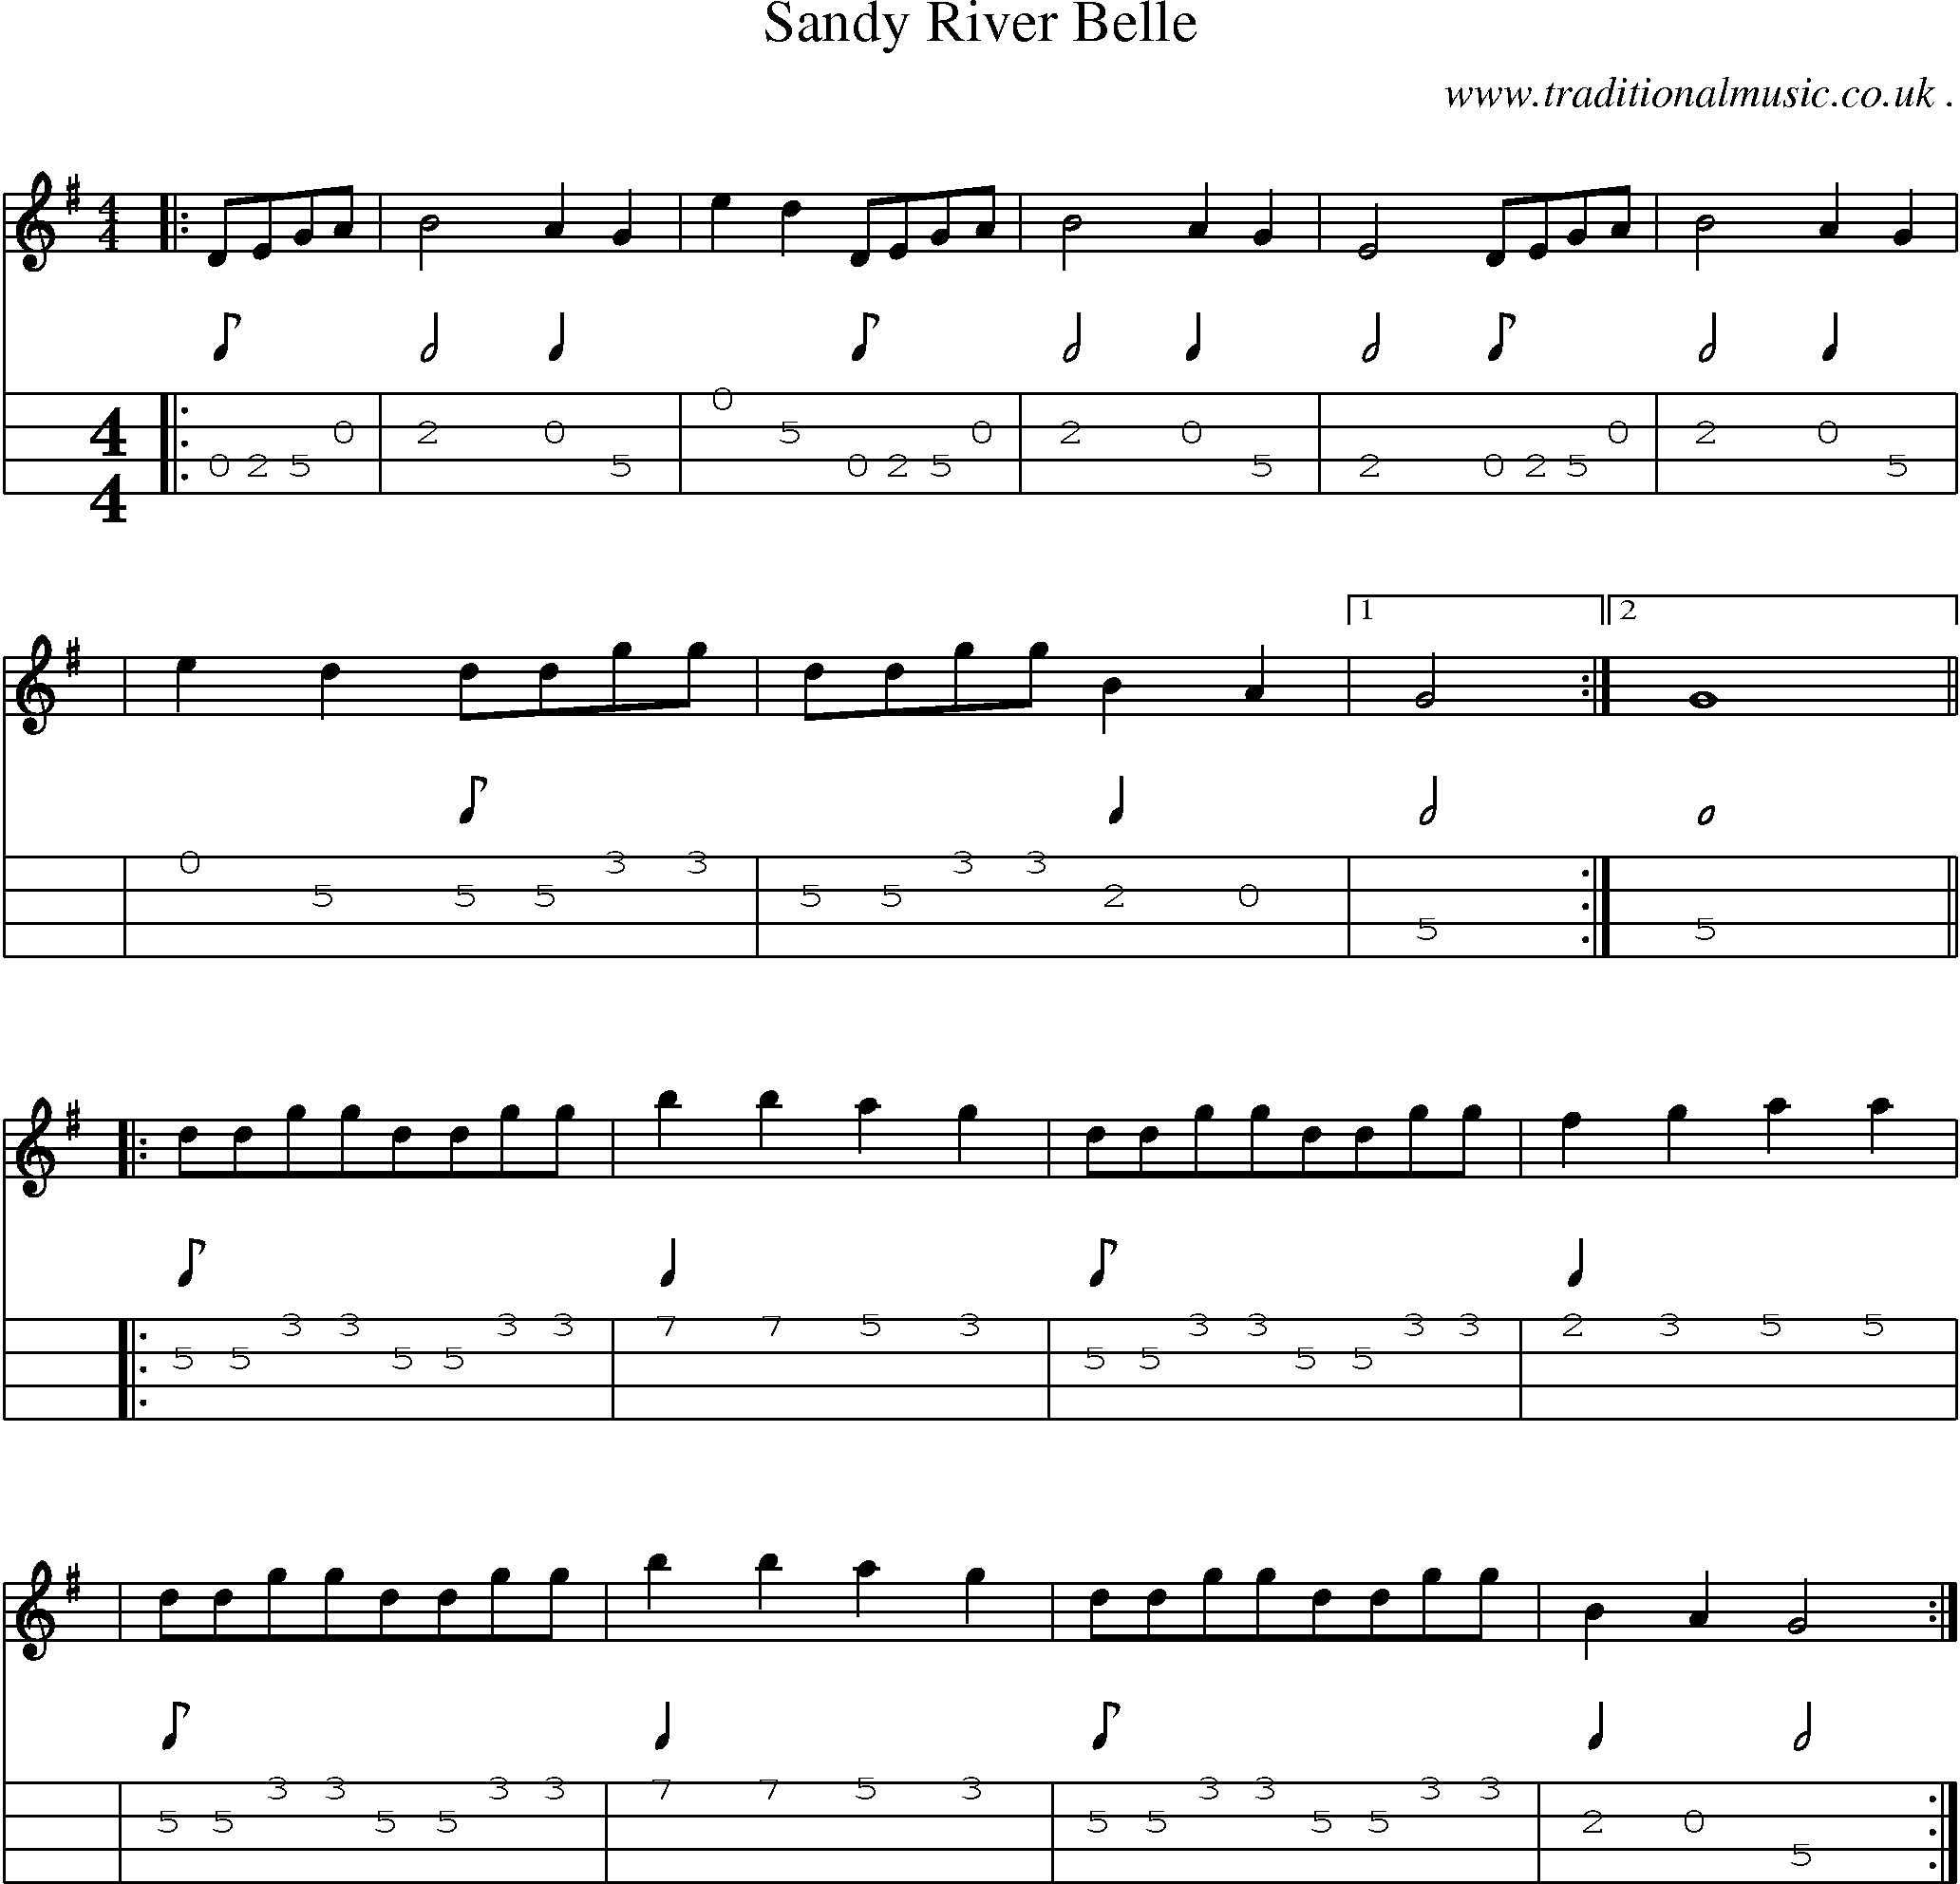 Music Score and Guitar Tabs for Sandy River Belle